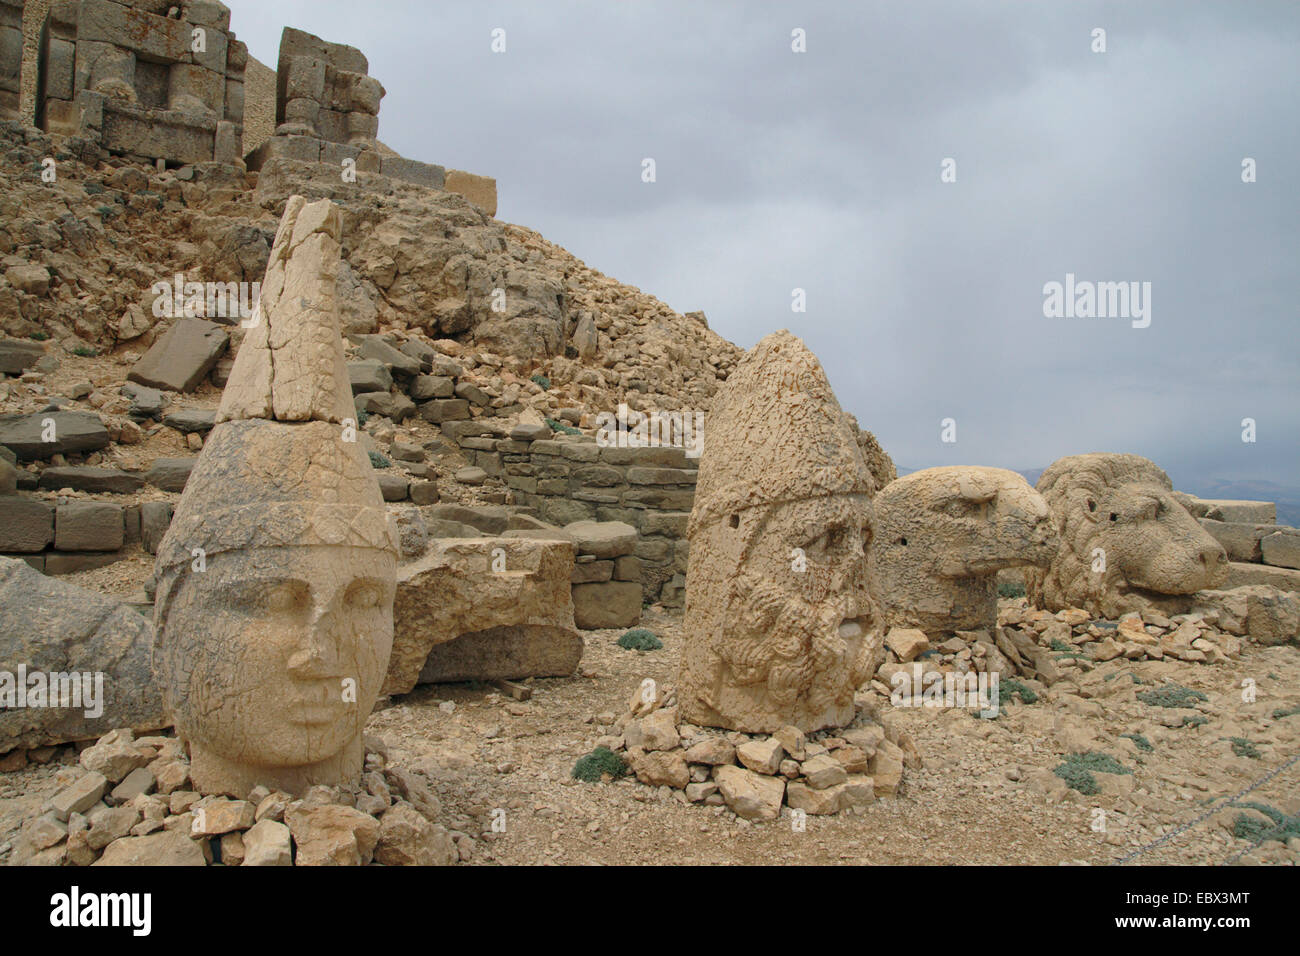 free-standing heads of over-size statues of kings and deities at the ancient sanctum and tomb at Mount Nemrut, Turkey, Anatolia, Taurusgebirge Stock Photo